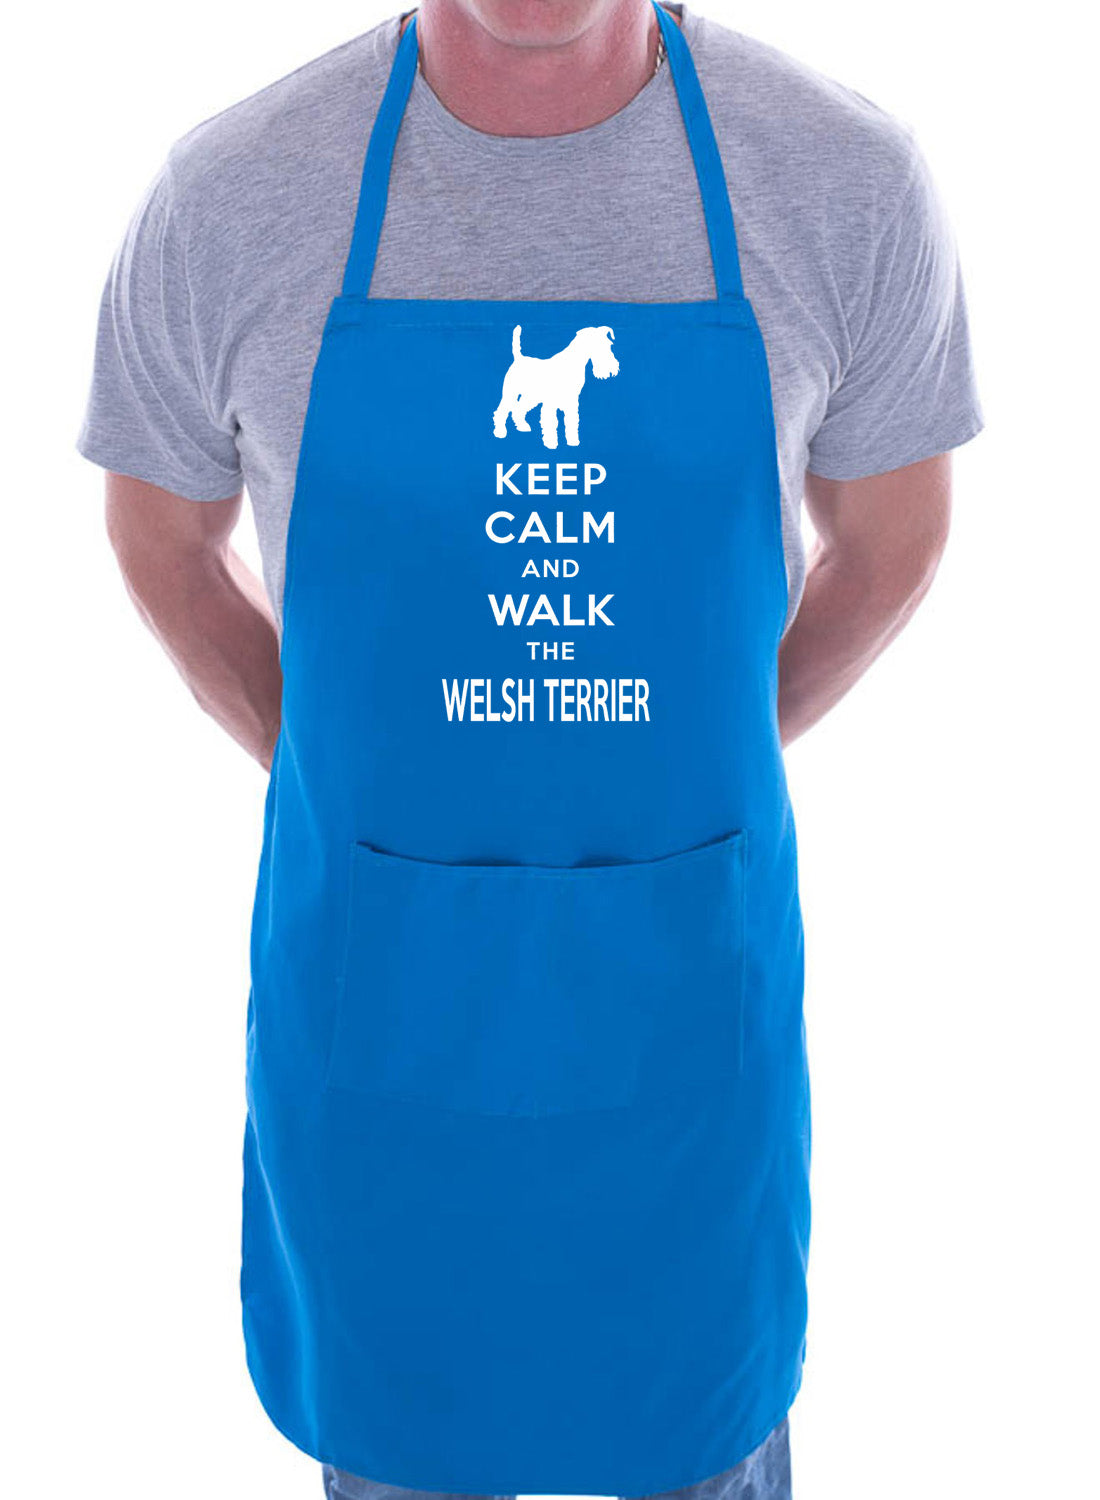 Keep Calm & Walk Welsh Terrier Funny Dog Lover Gift Novelty Cooking BBQ Apron